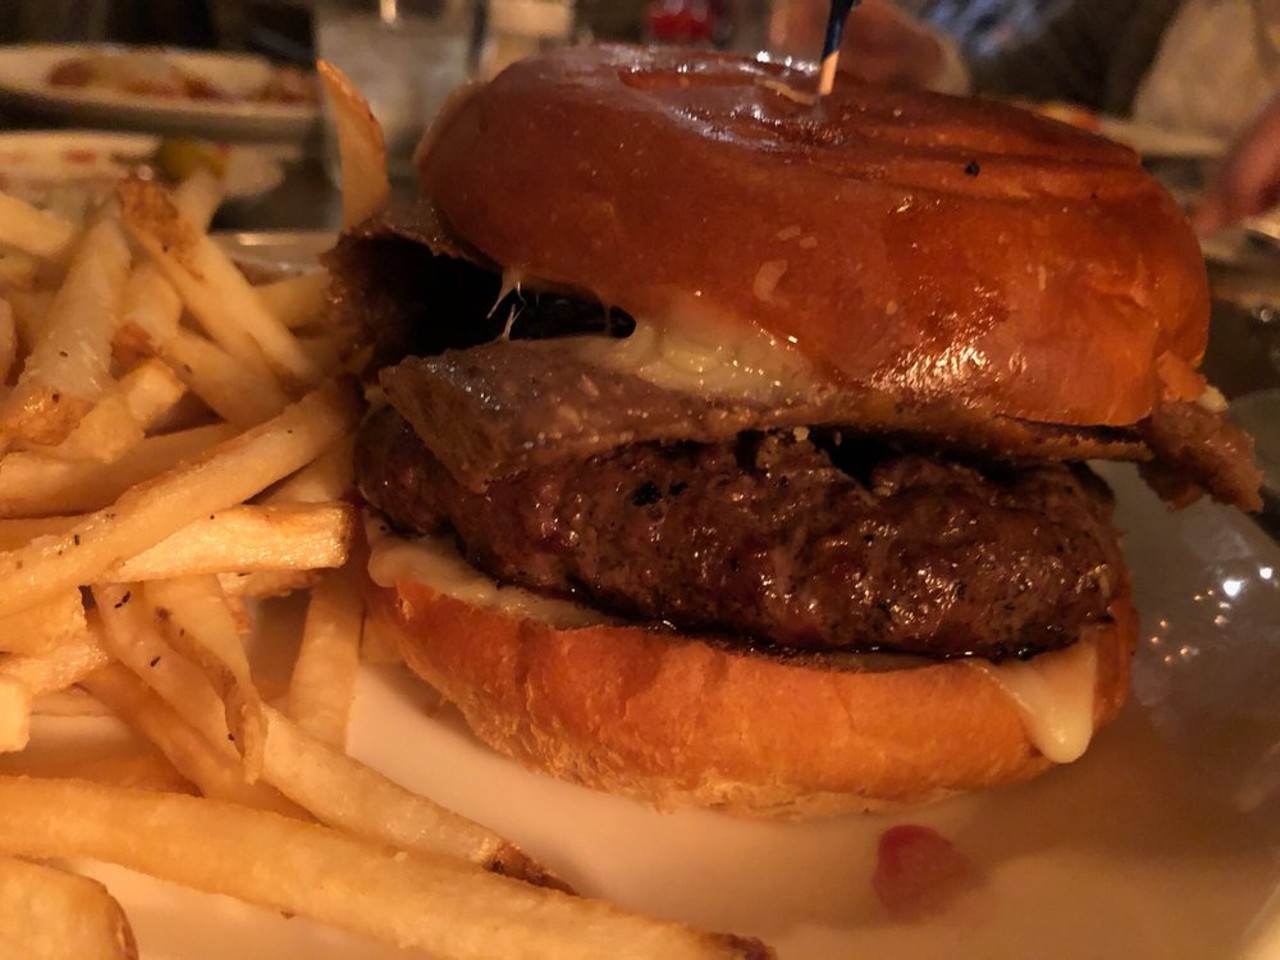 #27: Anthonino's Taverna
(2225 Macklind Avenue; 314-773-4455)
Known for its delicious Italian food, Anthonino&#146;s Taverna also scored a spot on Yelp&#146;s list for best burger. Find out more here.
Photo credit: Jason P. via Yelp